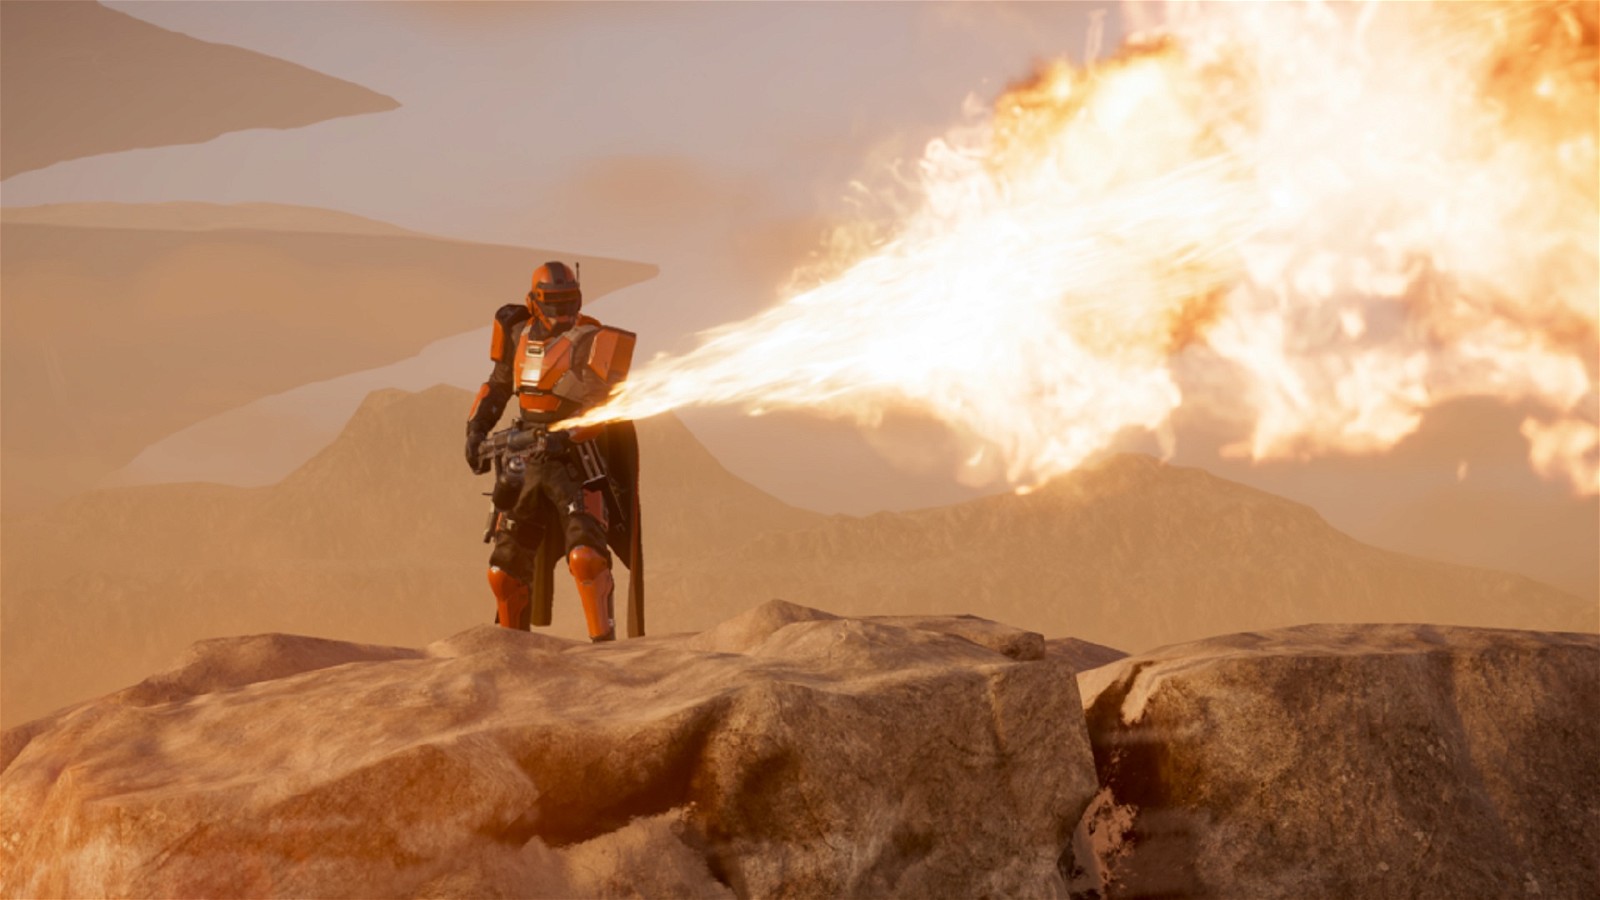 A still of a player using flamethrower in-game